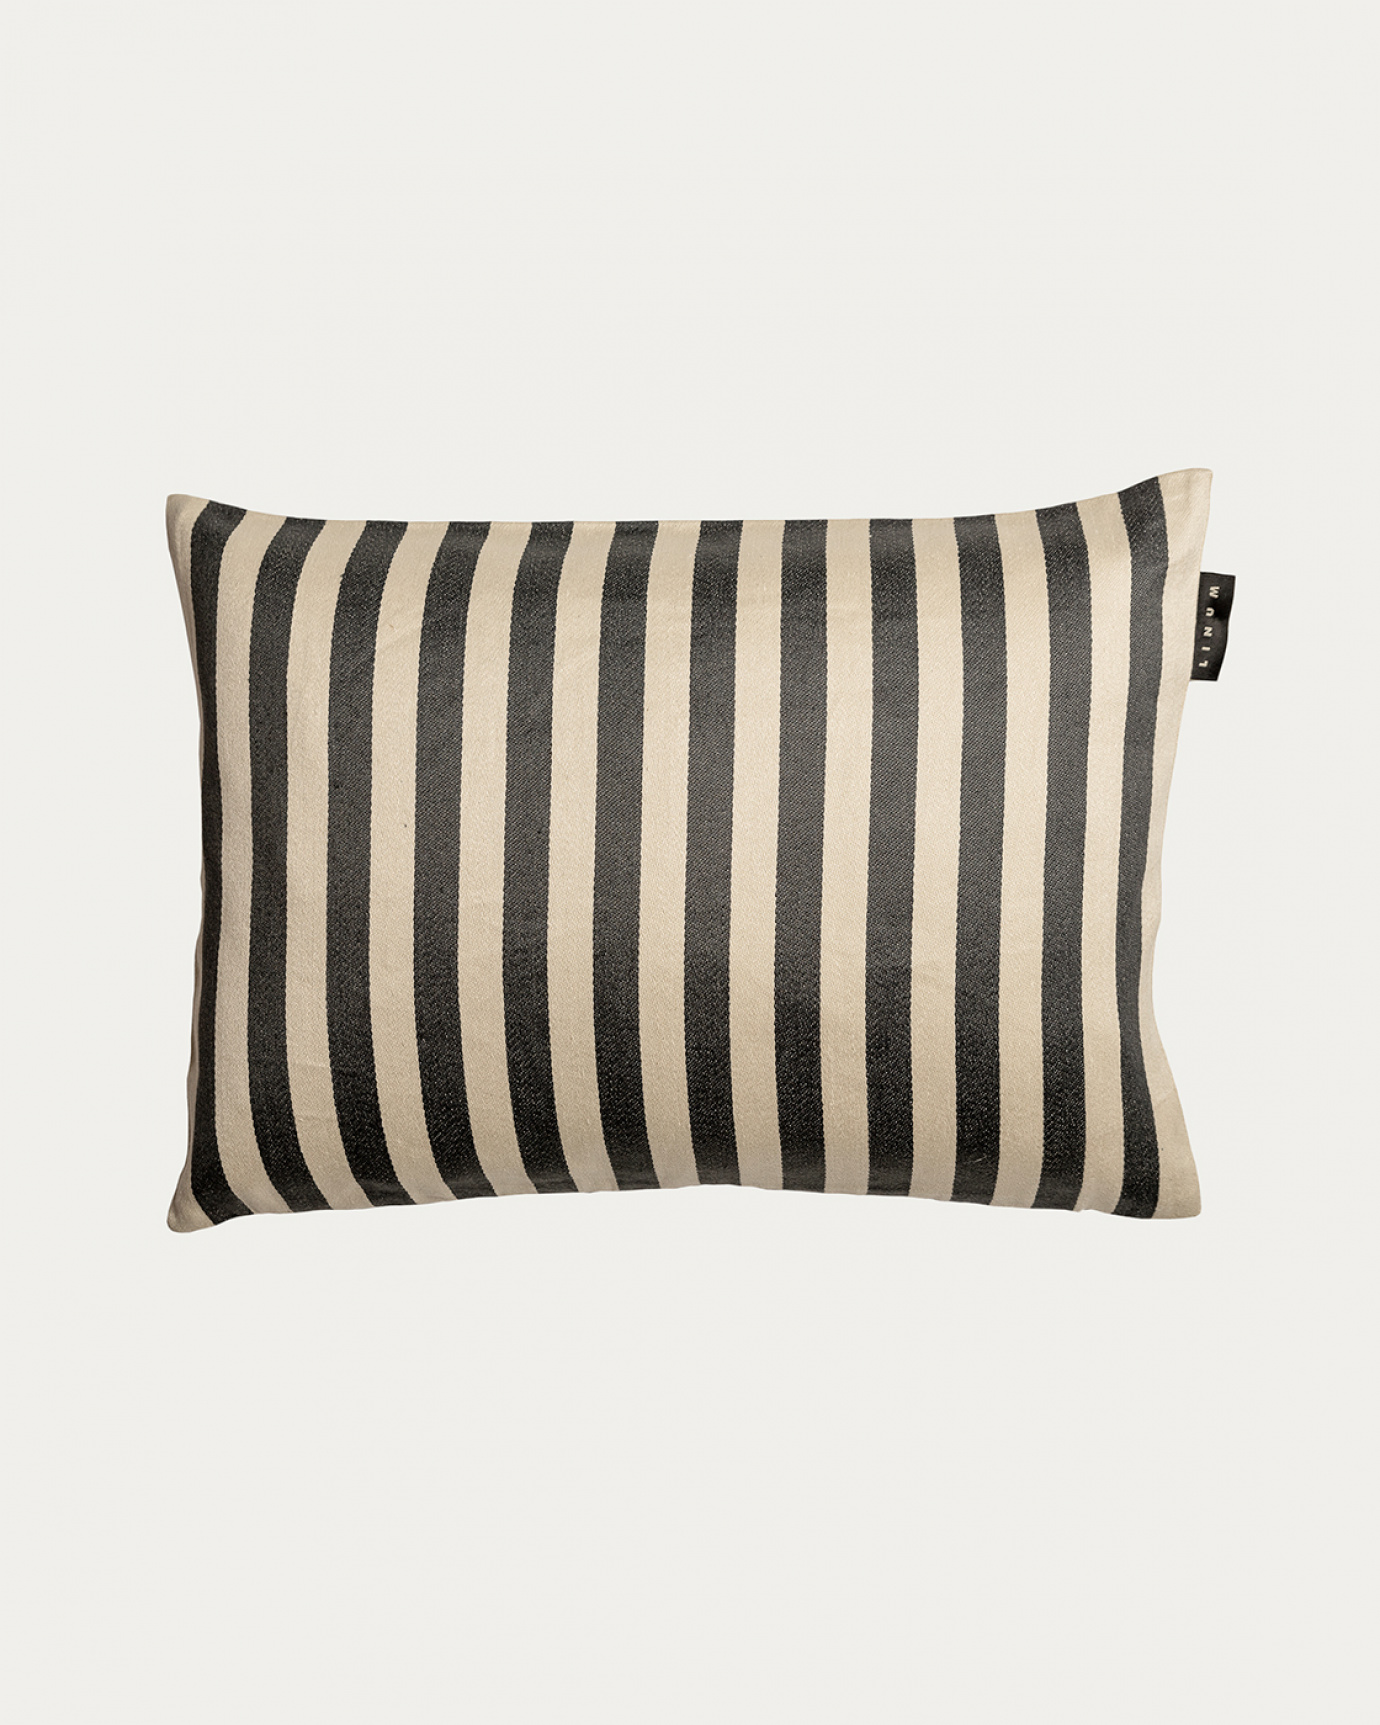 Product image dark charcoal grey AMALFI cushion cover with wide stripes made of 77% linen and 23% cotton from LINUM DESIGN. Size 35x50 cm.